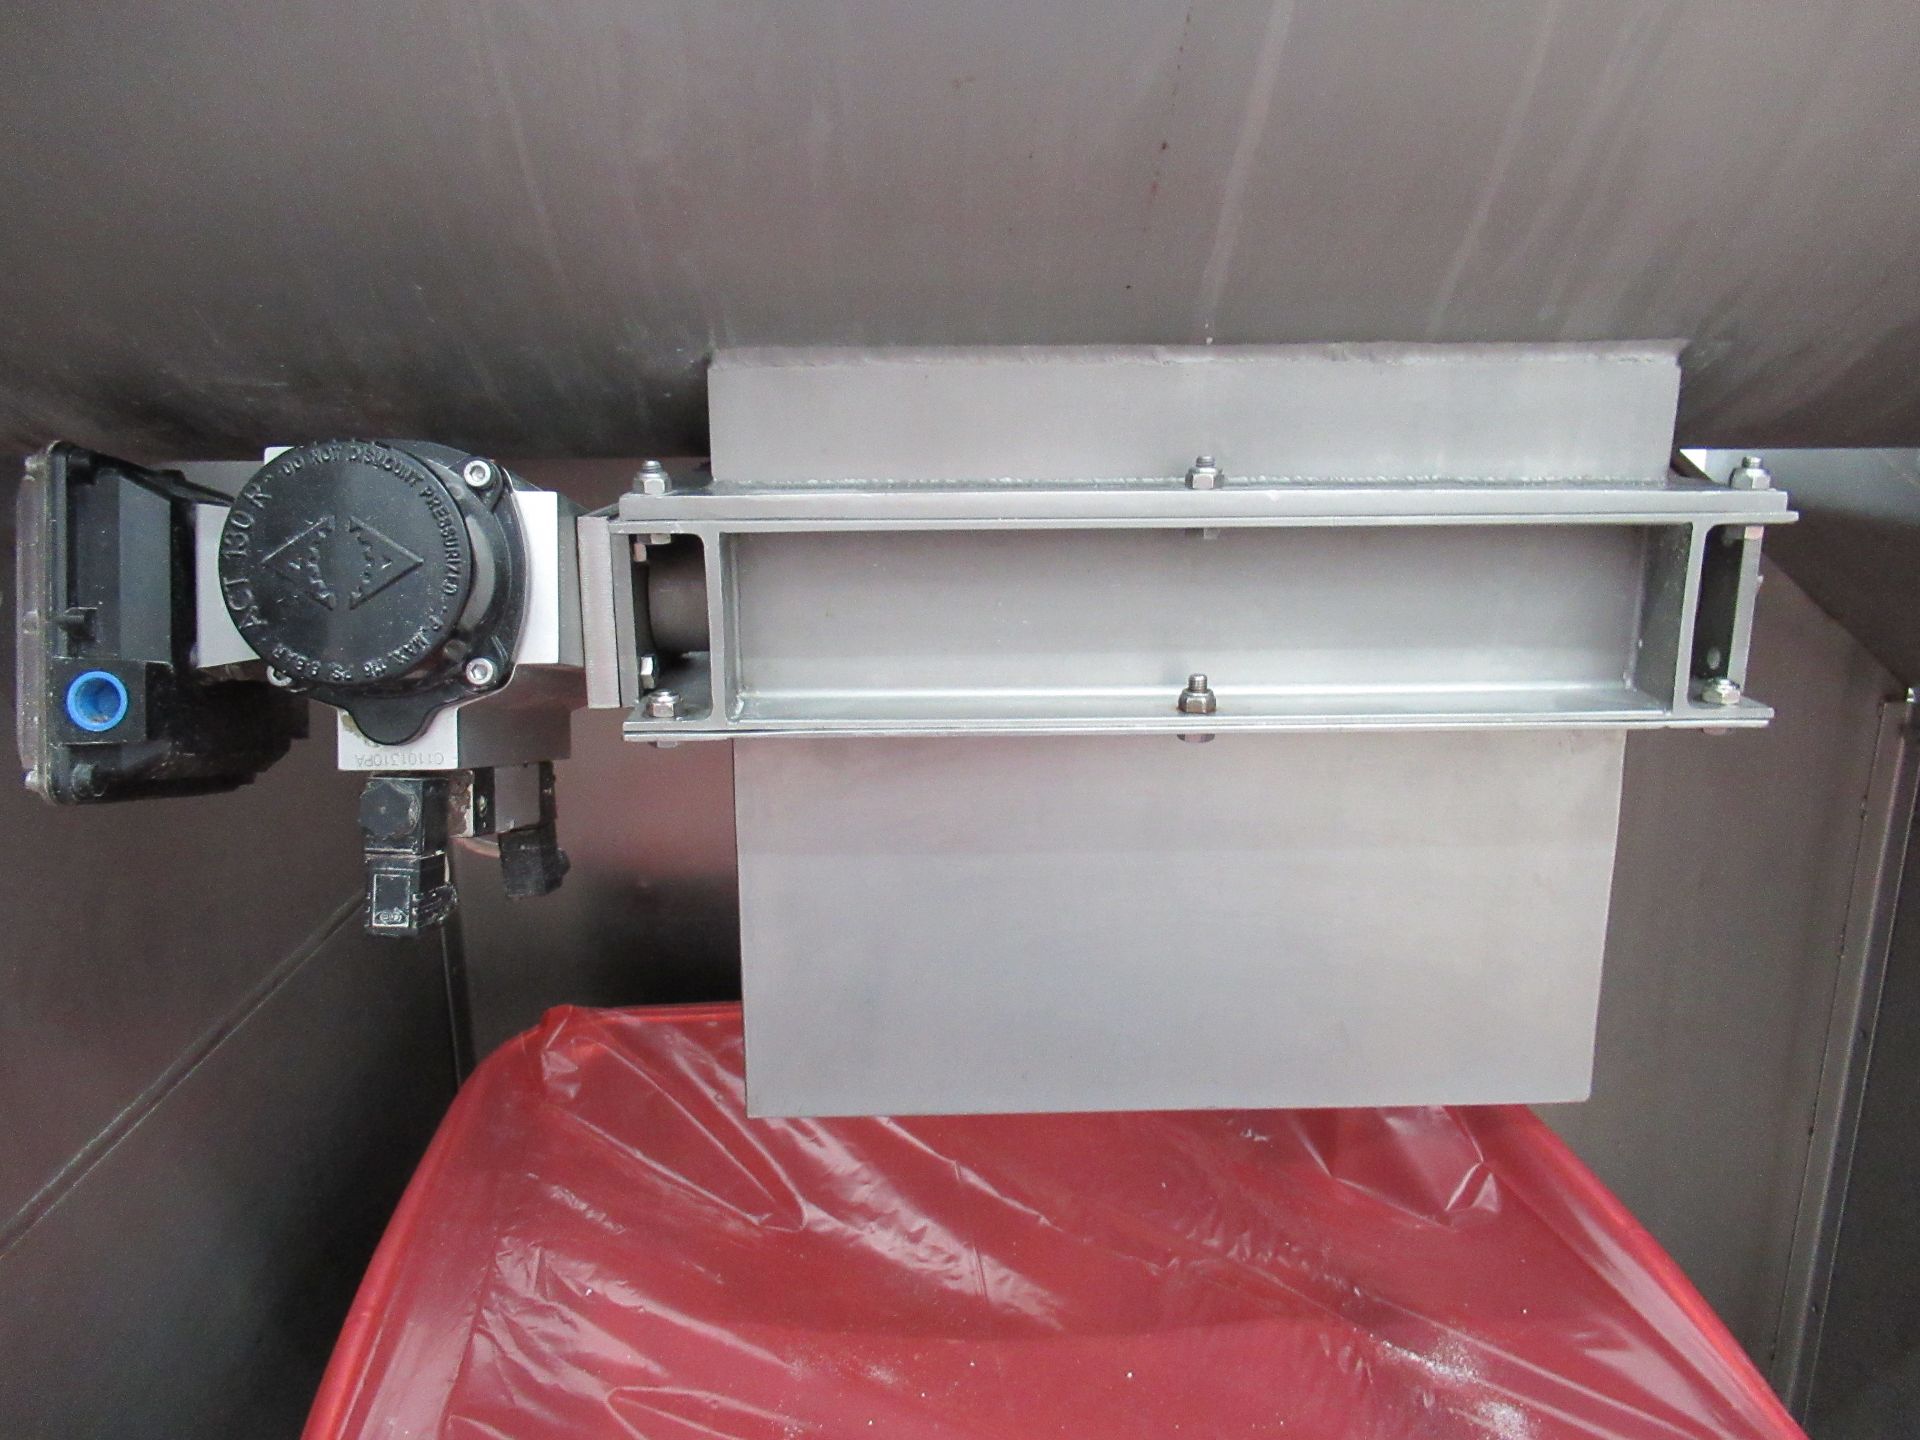 Winkworth RT200 stainless steel mixer Serial no: 16497 (2001) tare weight 1080kg, with fixed Base - Image 3 of 14